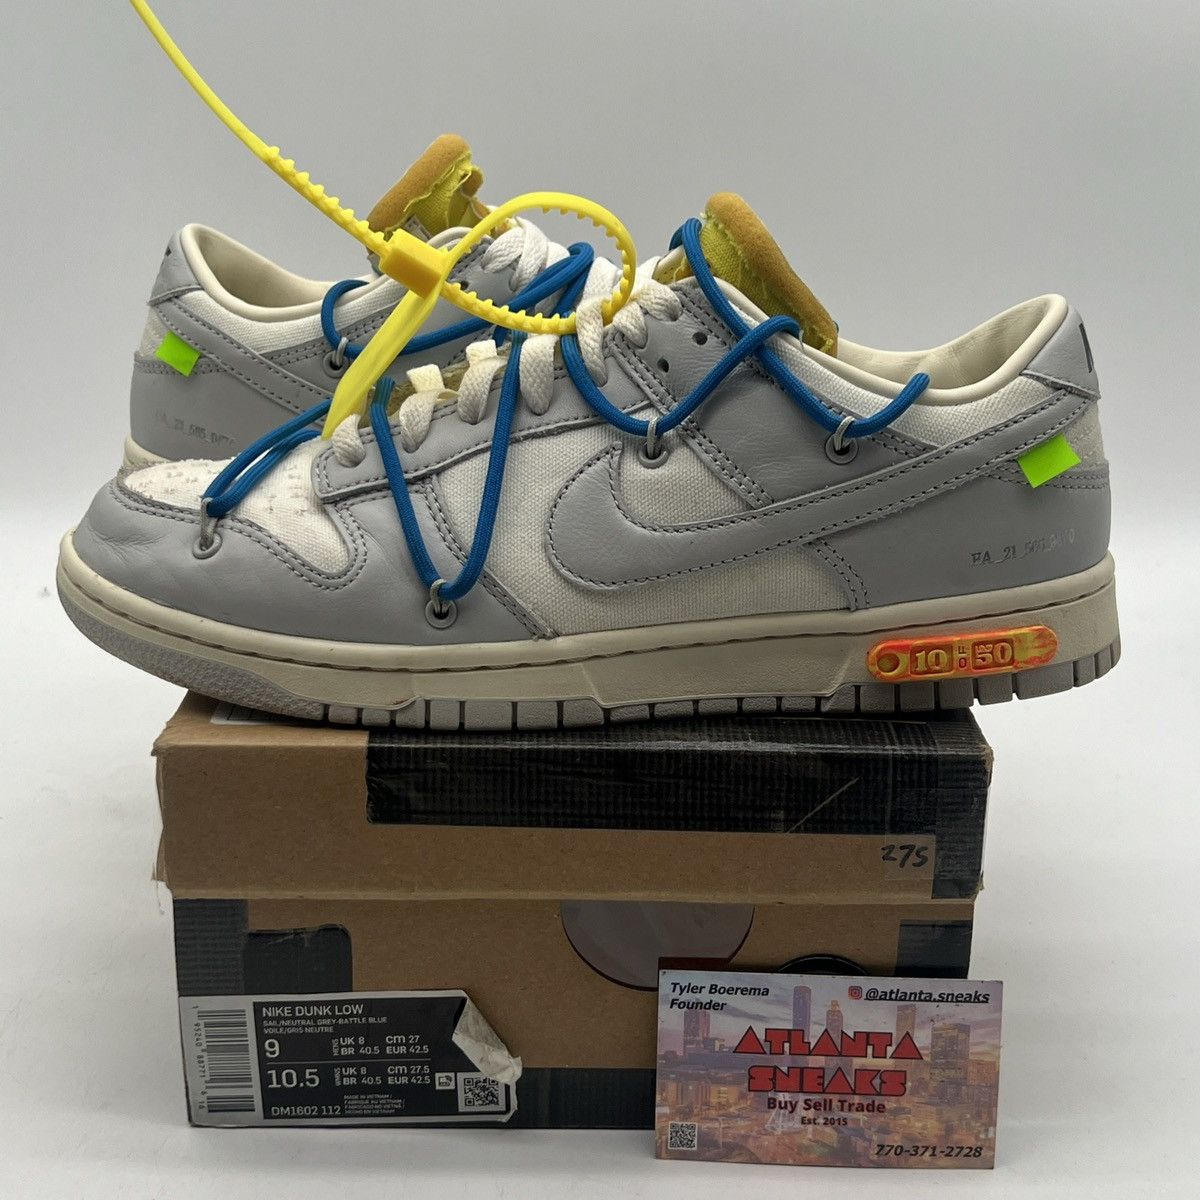 Nike Off-White x Nike Dunk low Lot 10 of 50 | Grailed